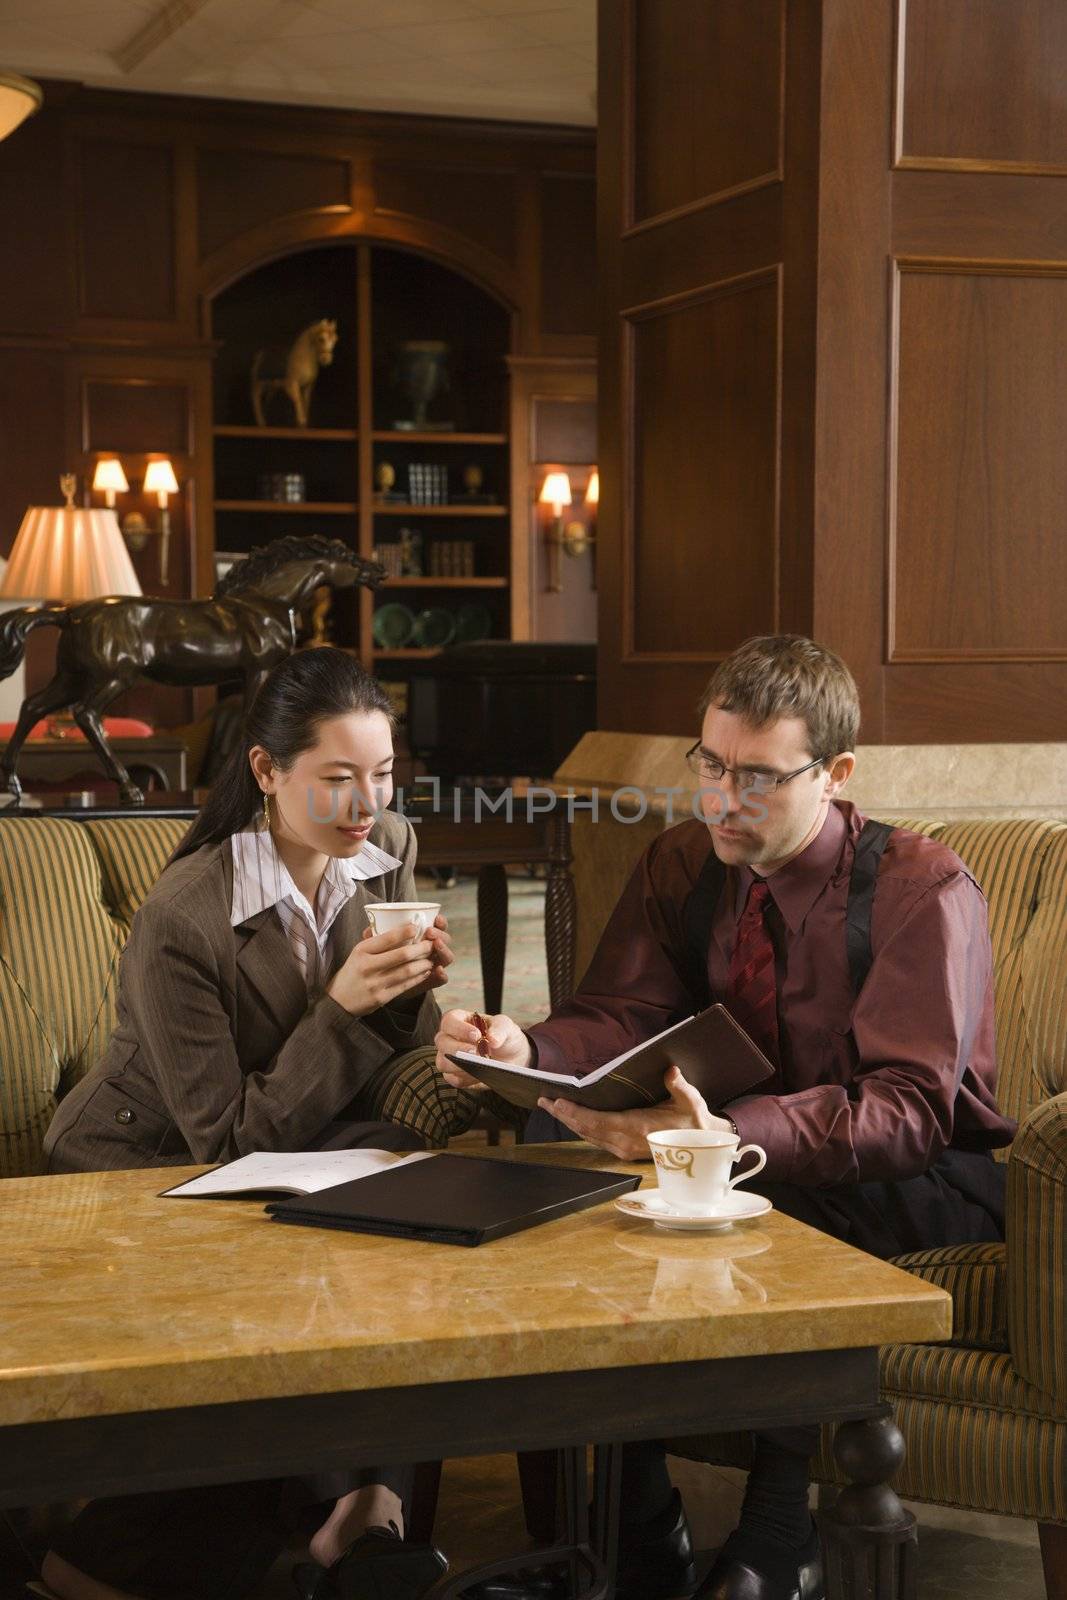 Caucasian mid adult businessman and woman drinking coffee and looking at portfolio.